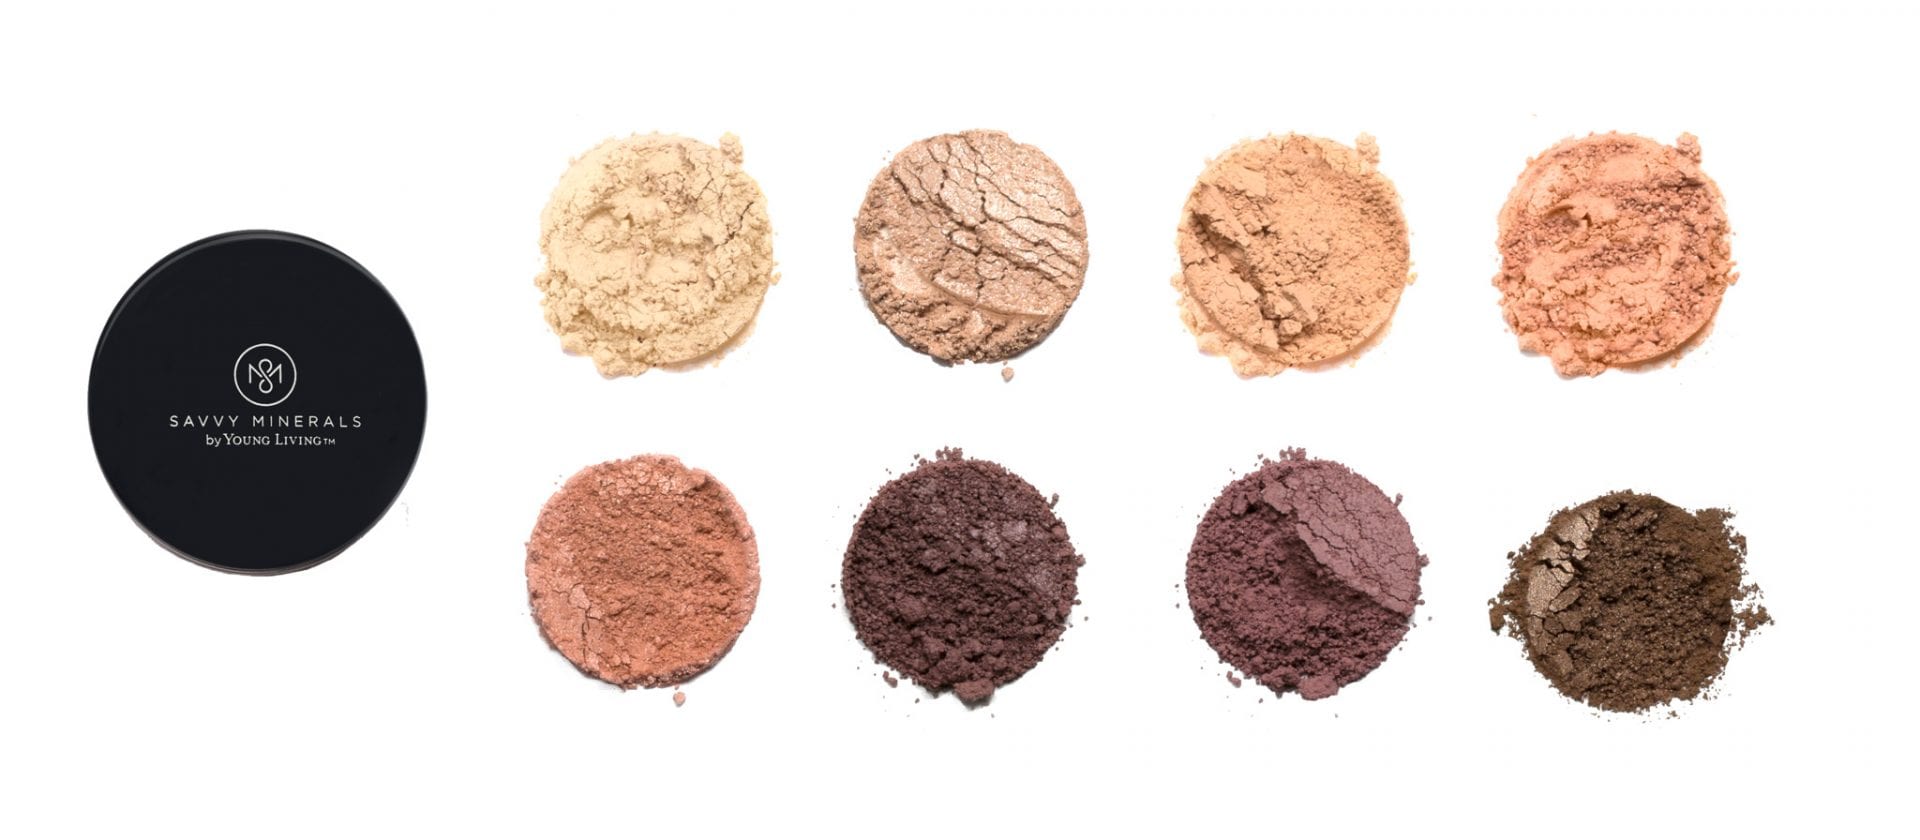 Young Living's Savvy Minerals Make-up